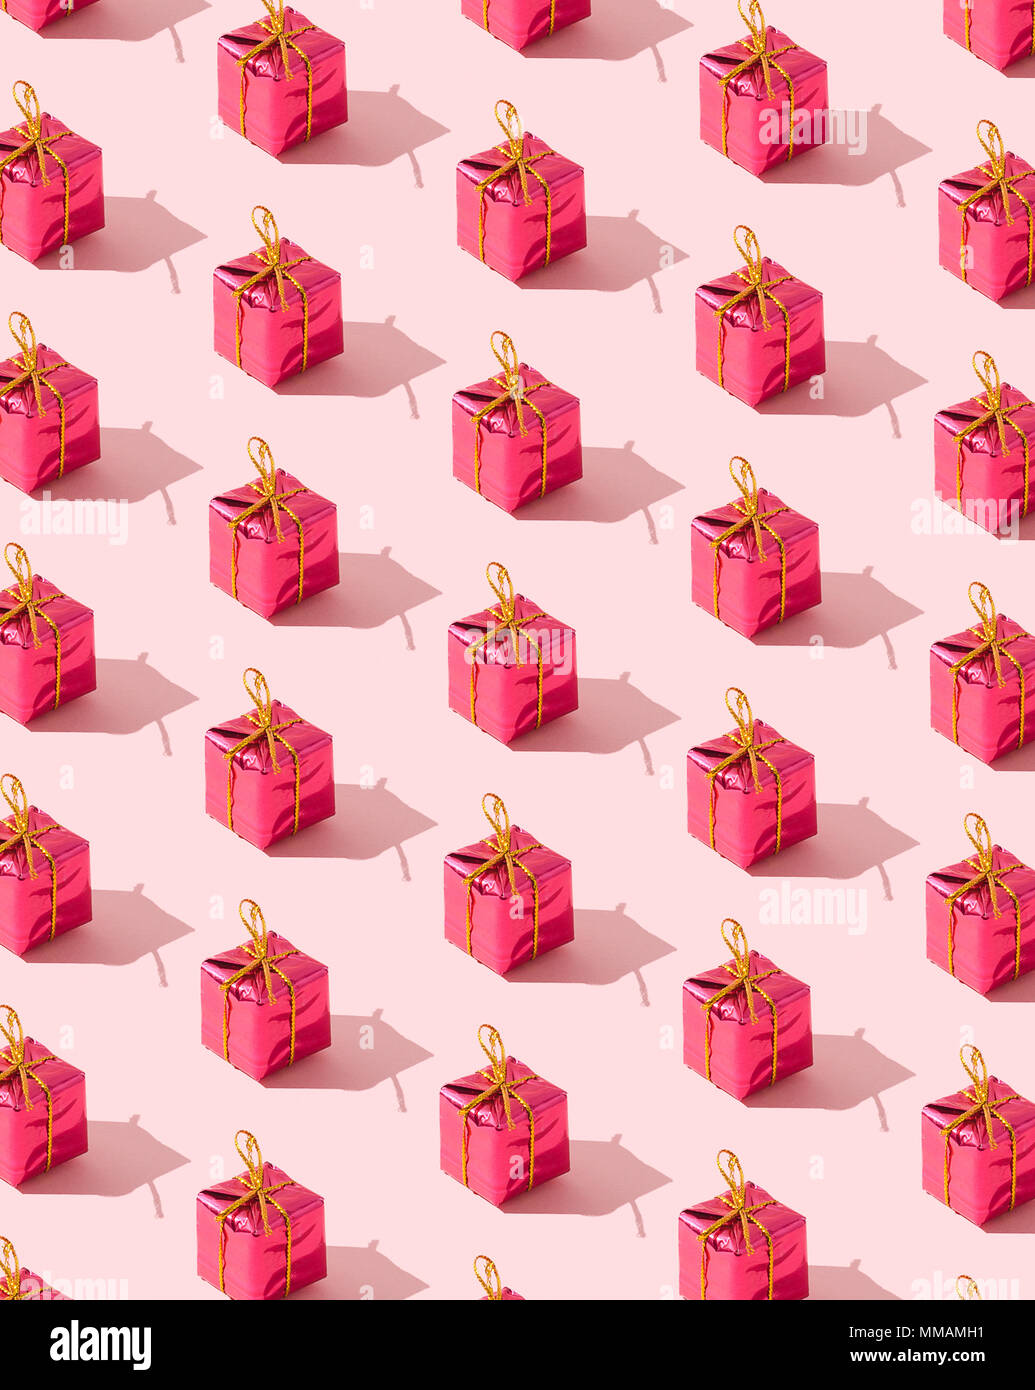 Small gift boxes organized over pink background Stock Photo